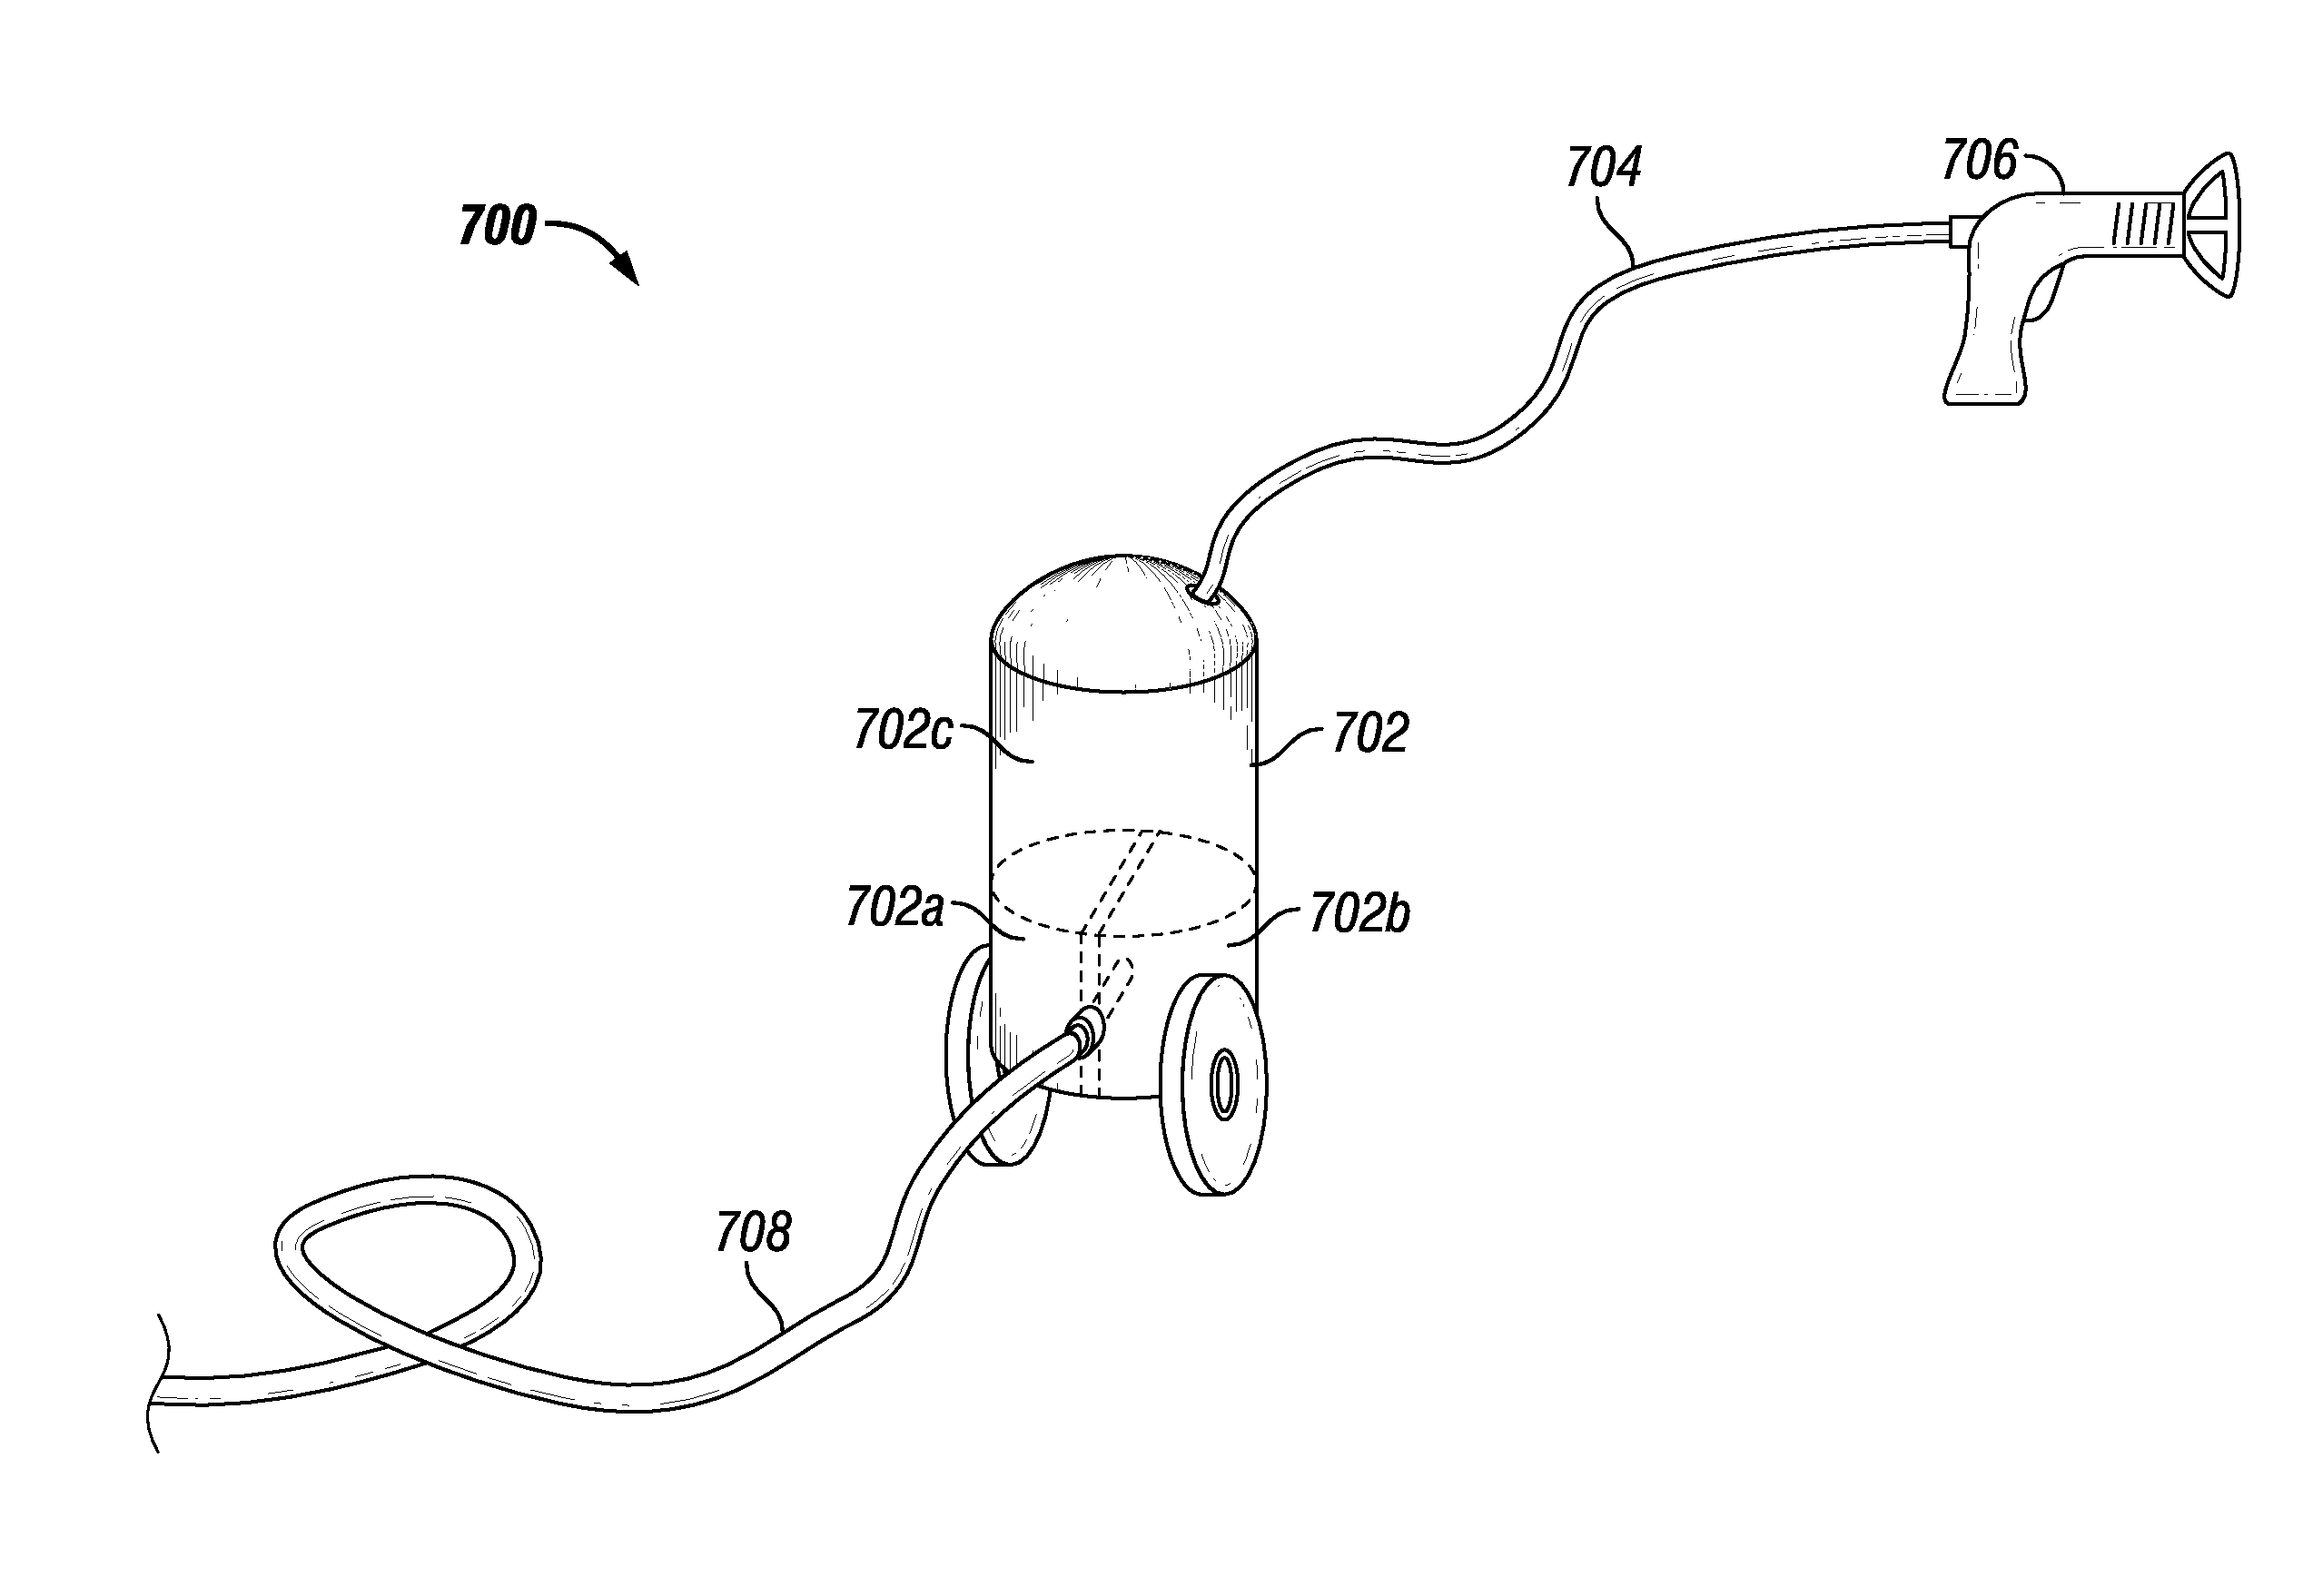 Flood Temporary Relief System and Method